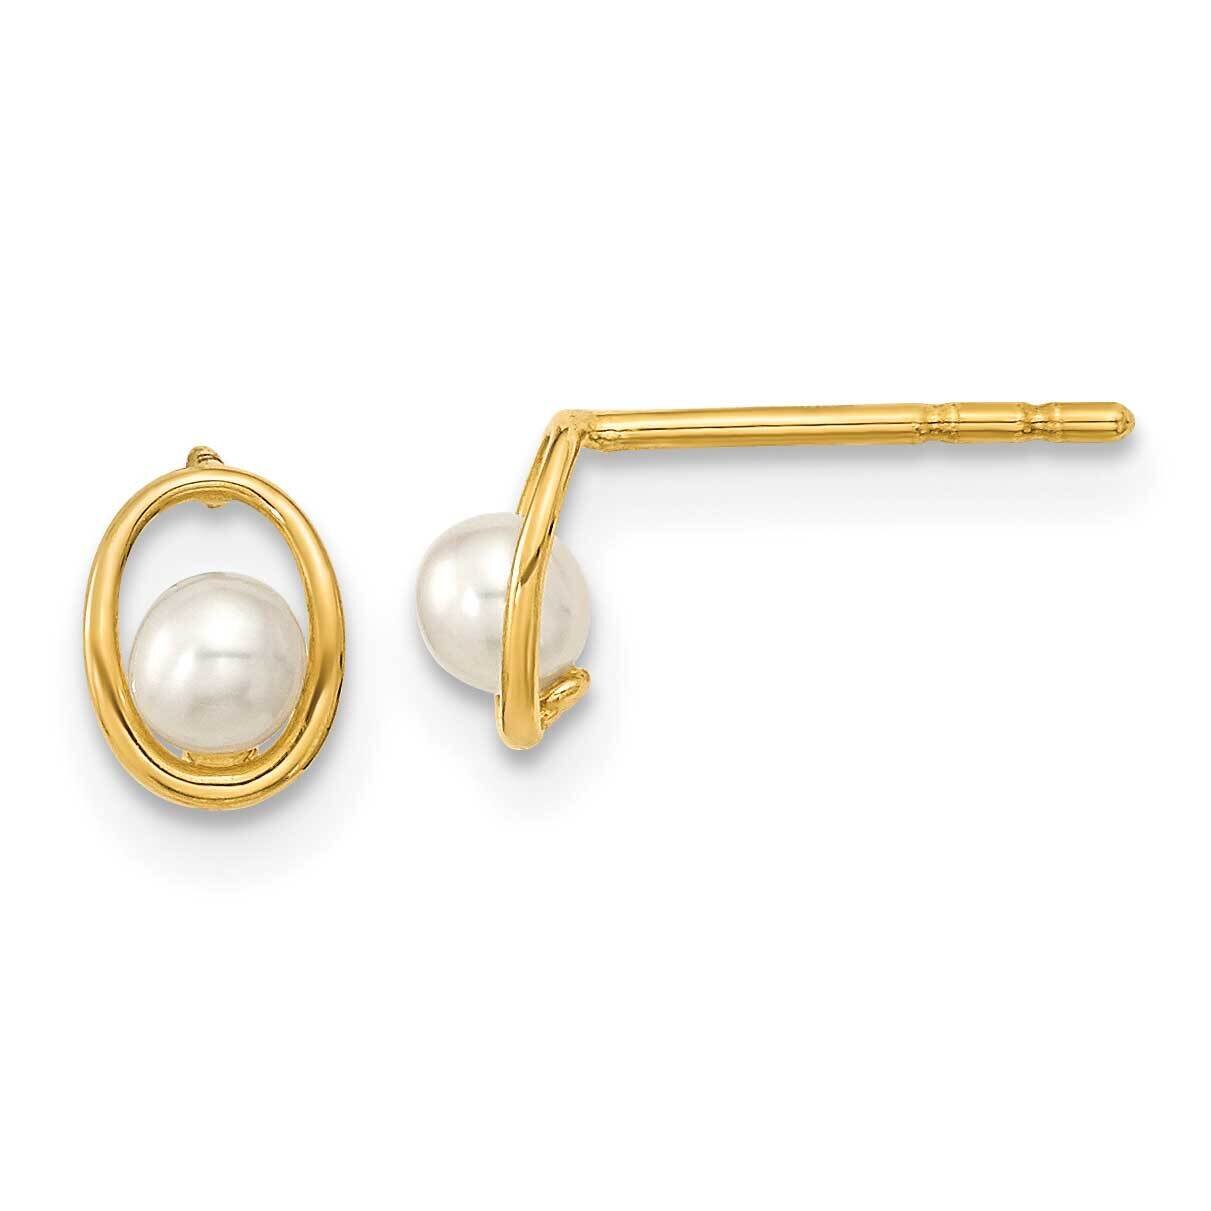 Oval with Fw Cultured Pearl Post Earrings 14k Gold Polished SE3039